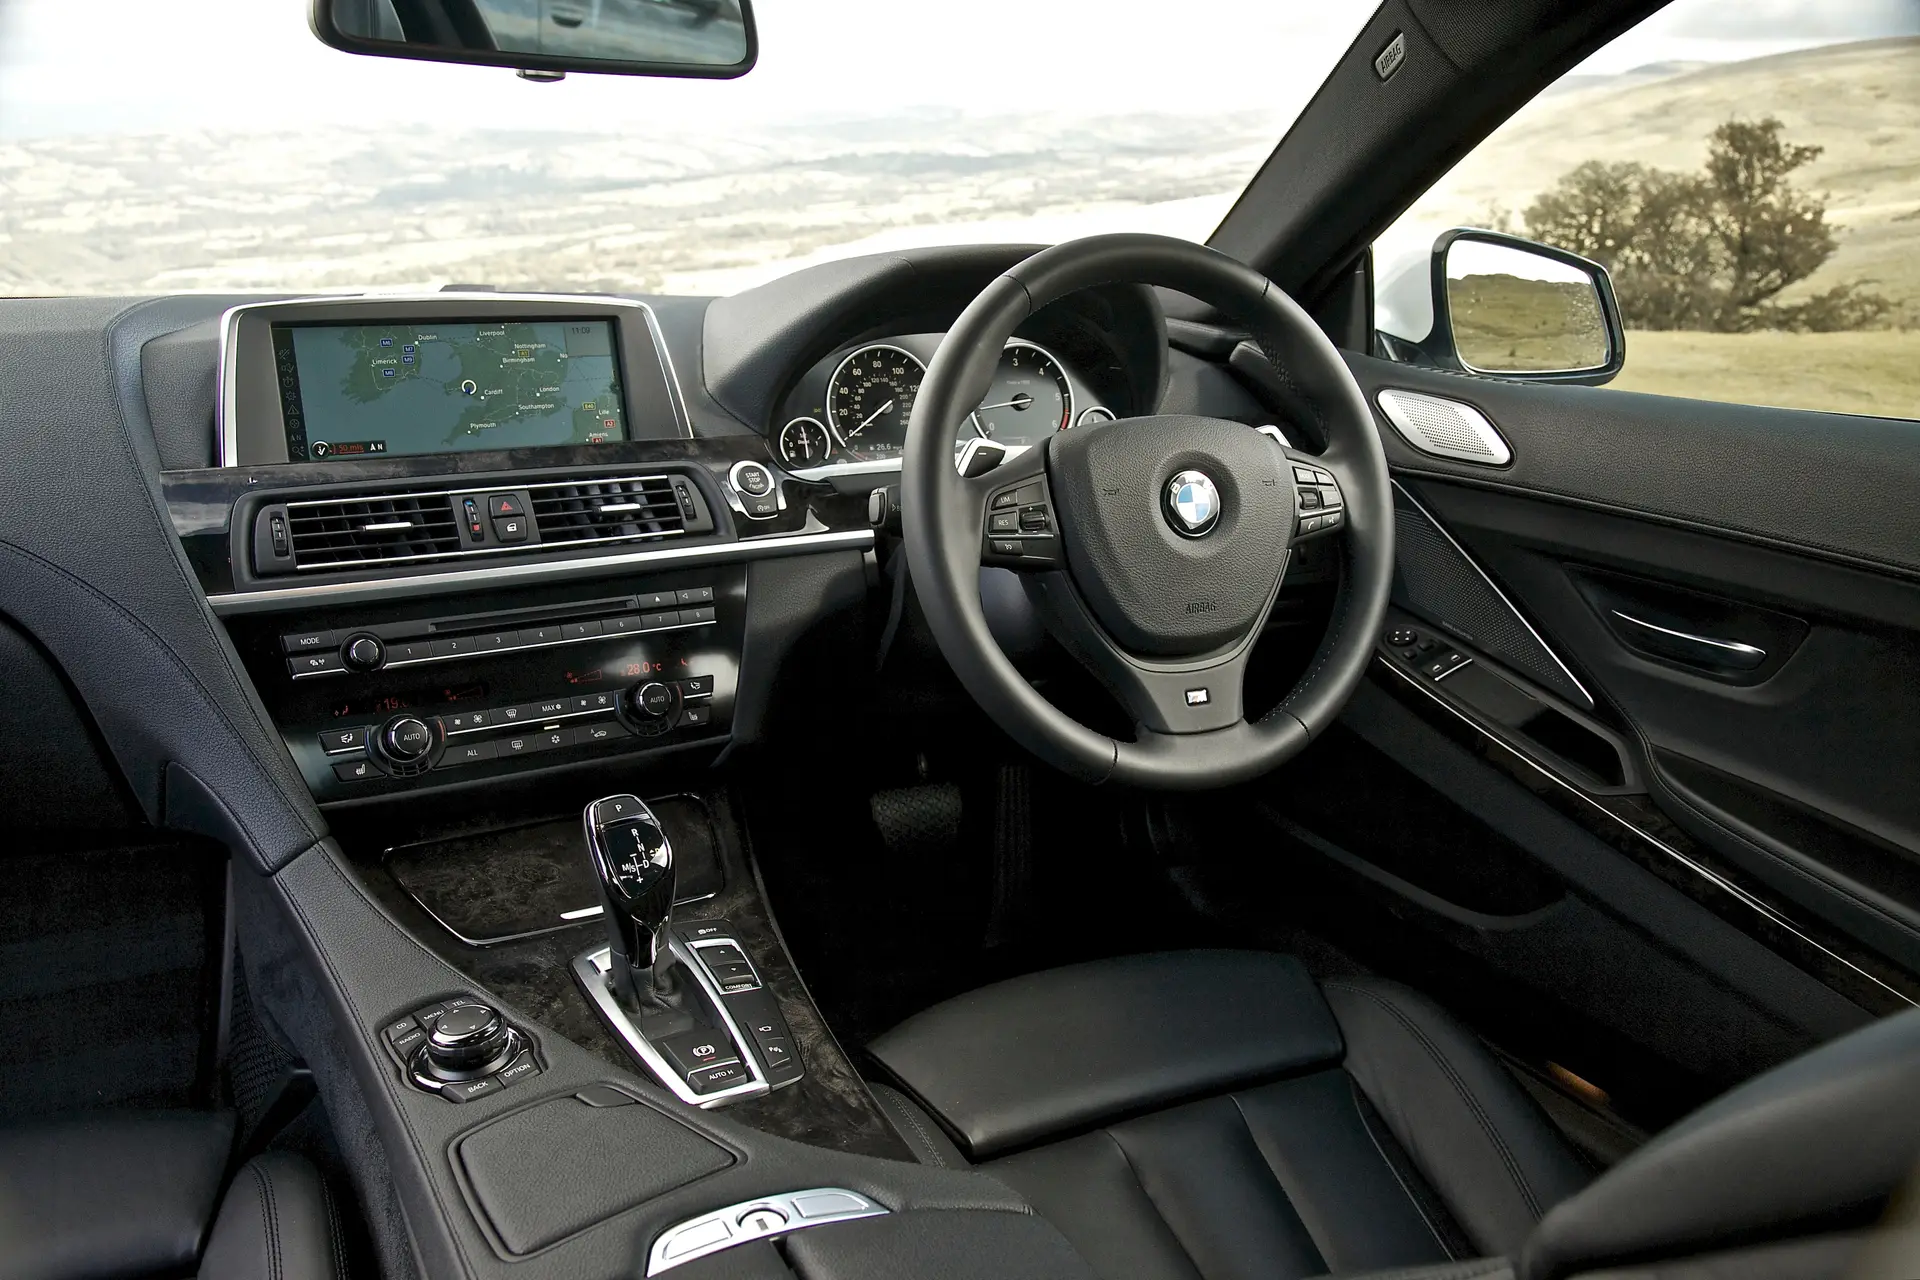 BMW 6 Series (2011-2018) Review: interior close up photo of the BMW 6 Series dashboard